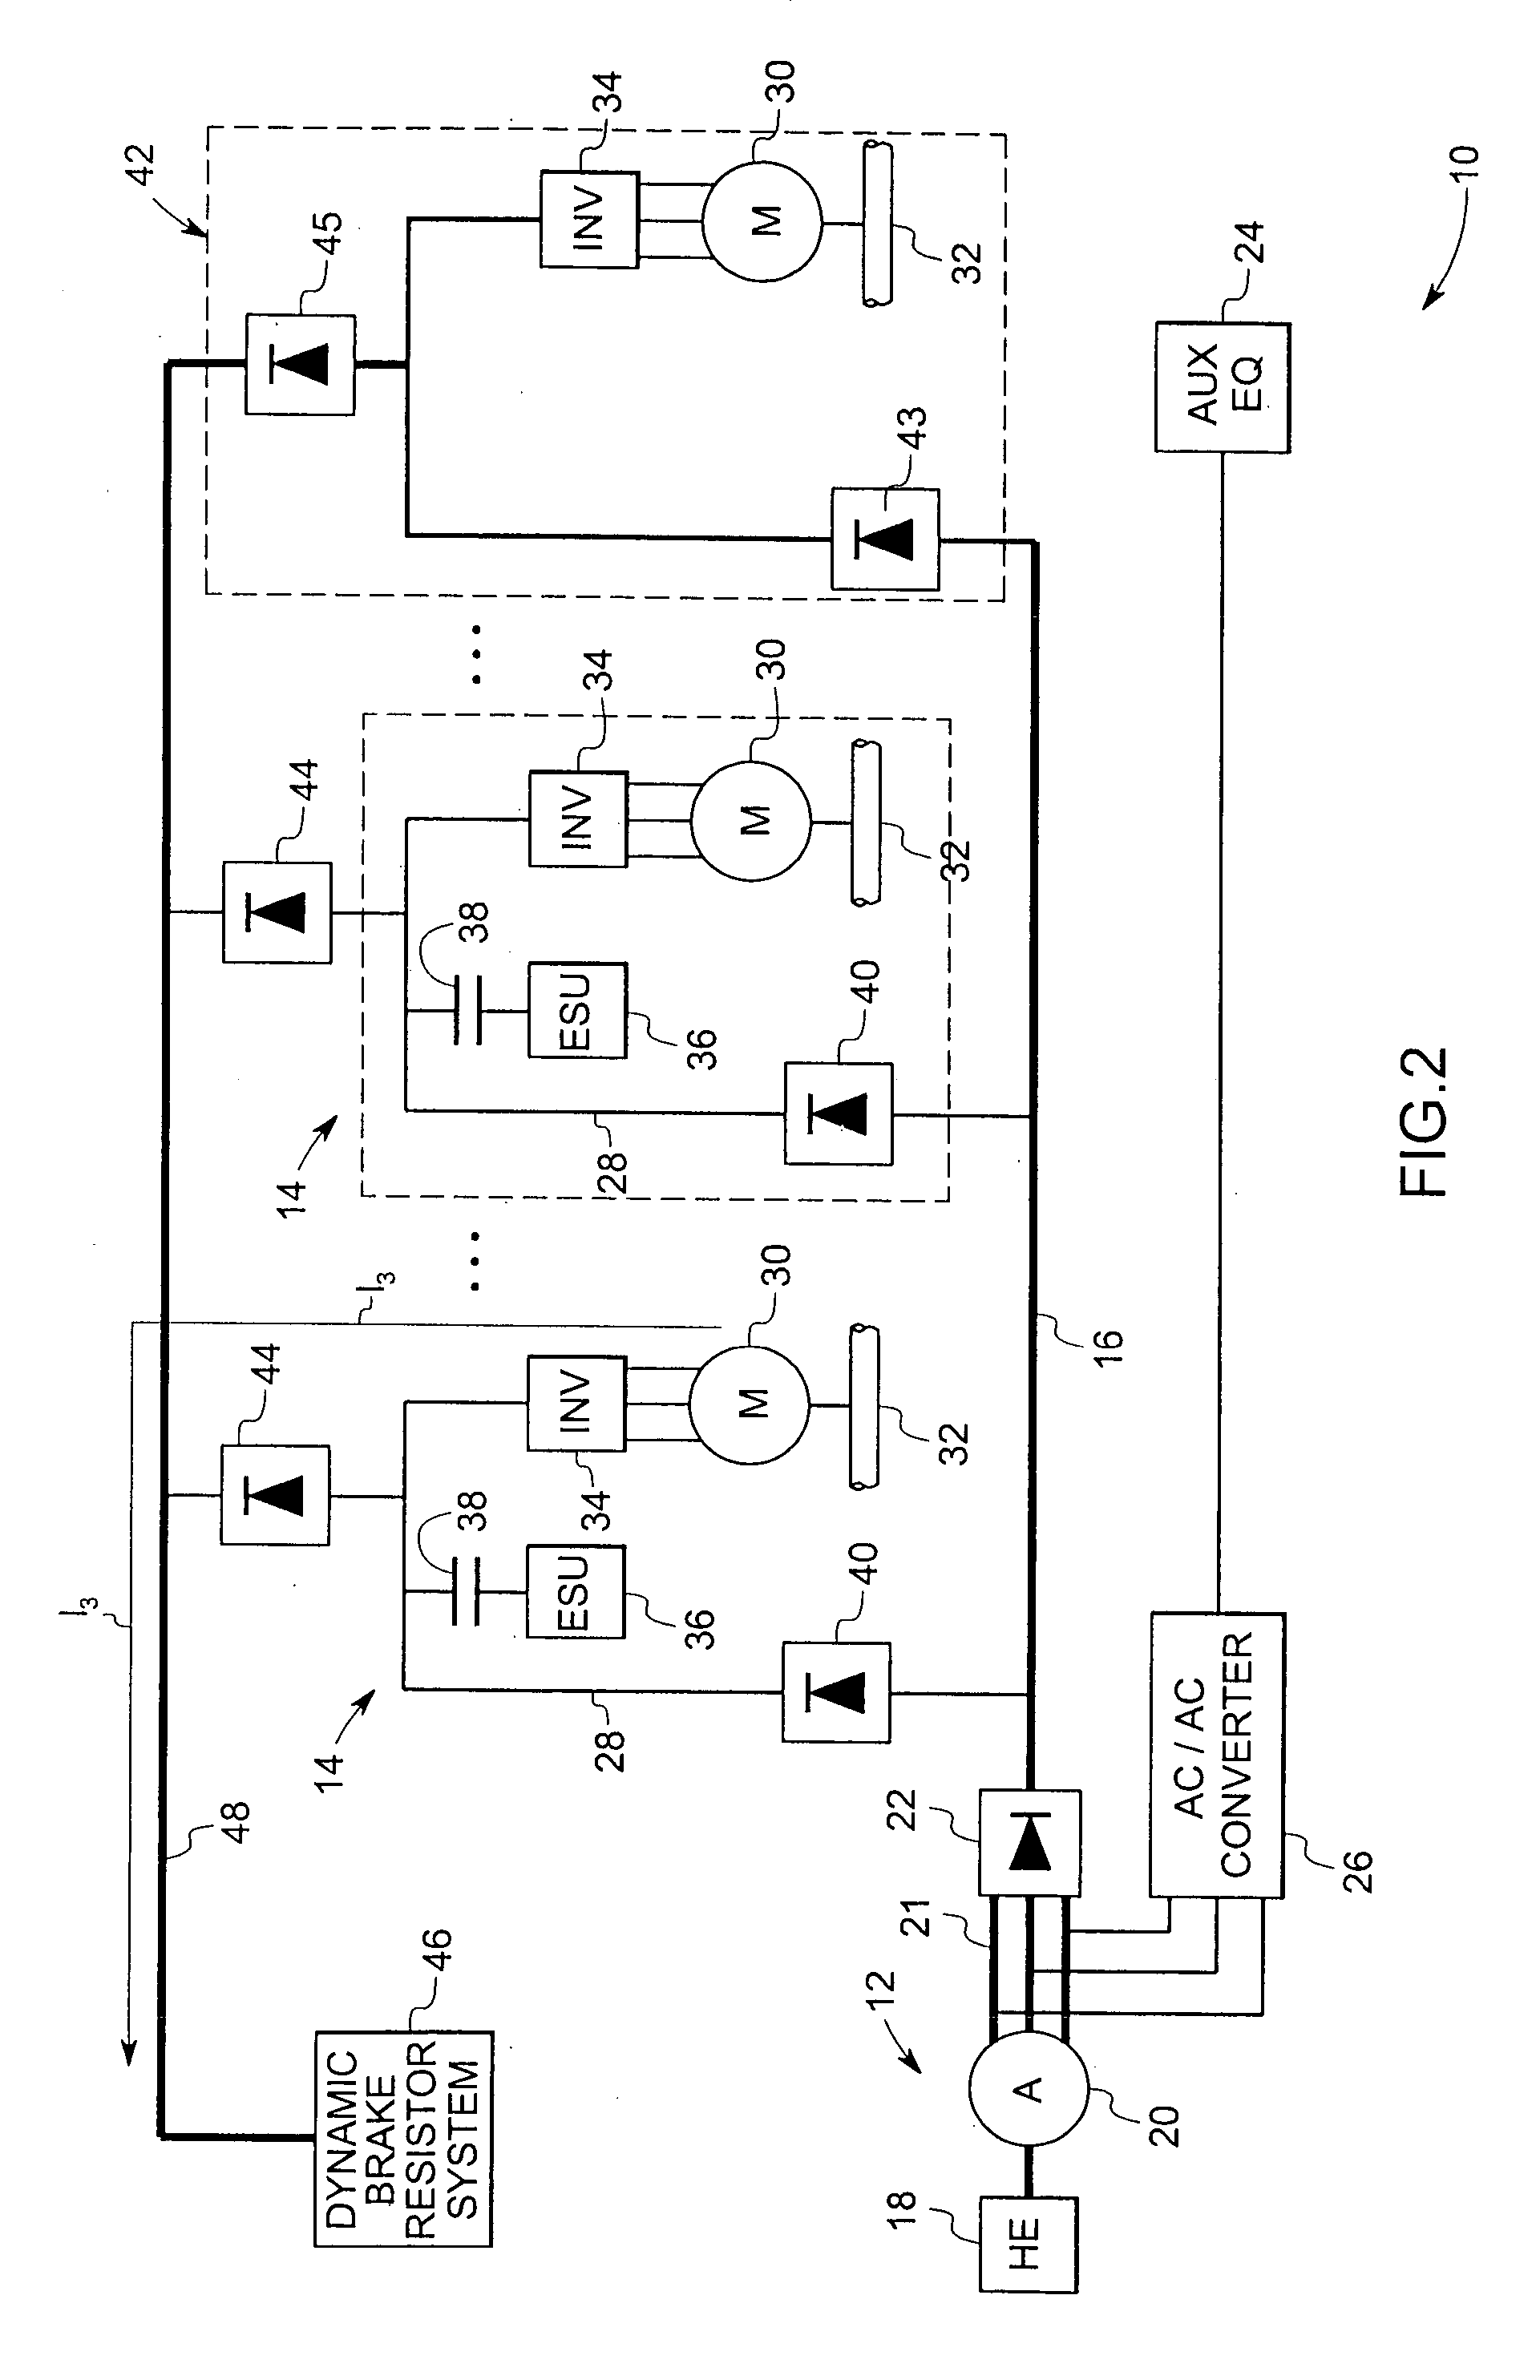 Energy storage system and method for hybrid propulsion